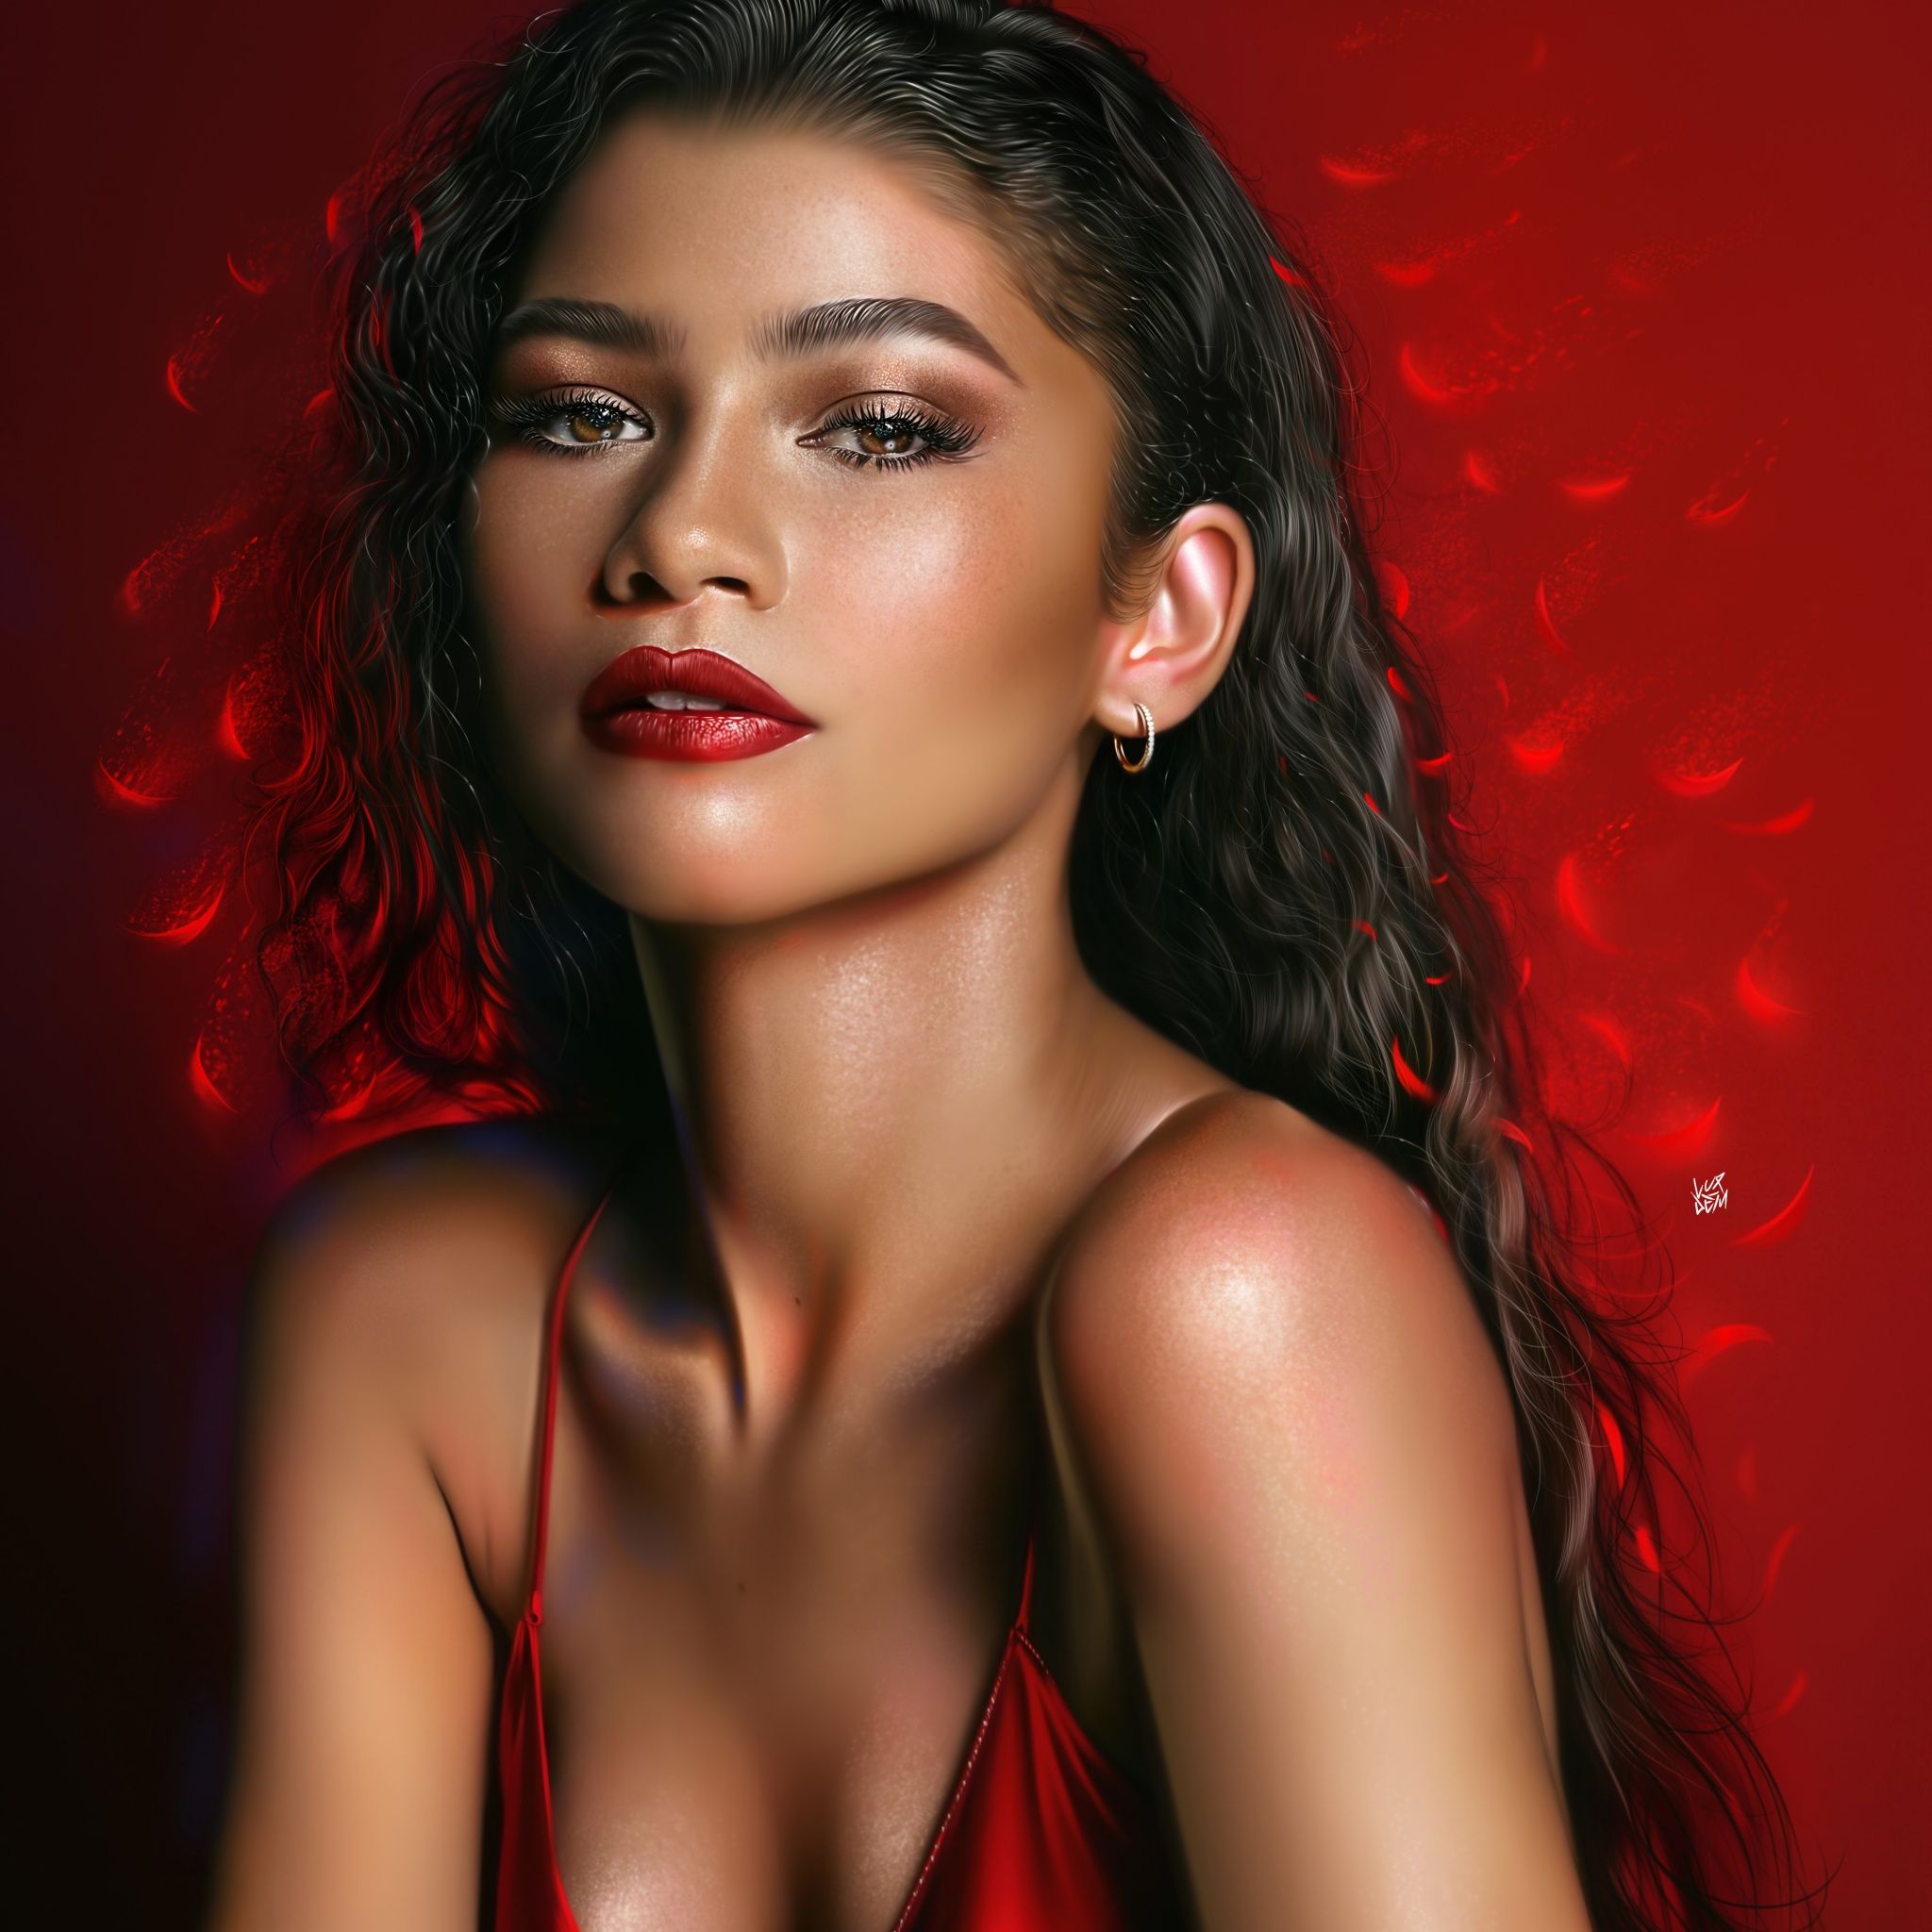 Zendaya is an American actress and singer. She began her career as a child actress and rose to prominence in 2015 after being cast in the Disney Channel sitcom Shake It Up. - Zendaya